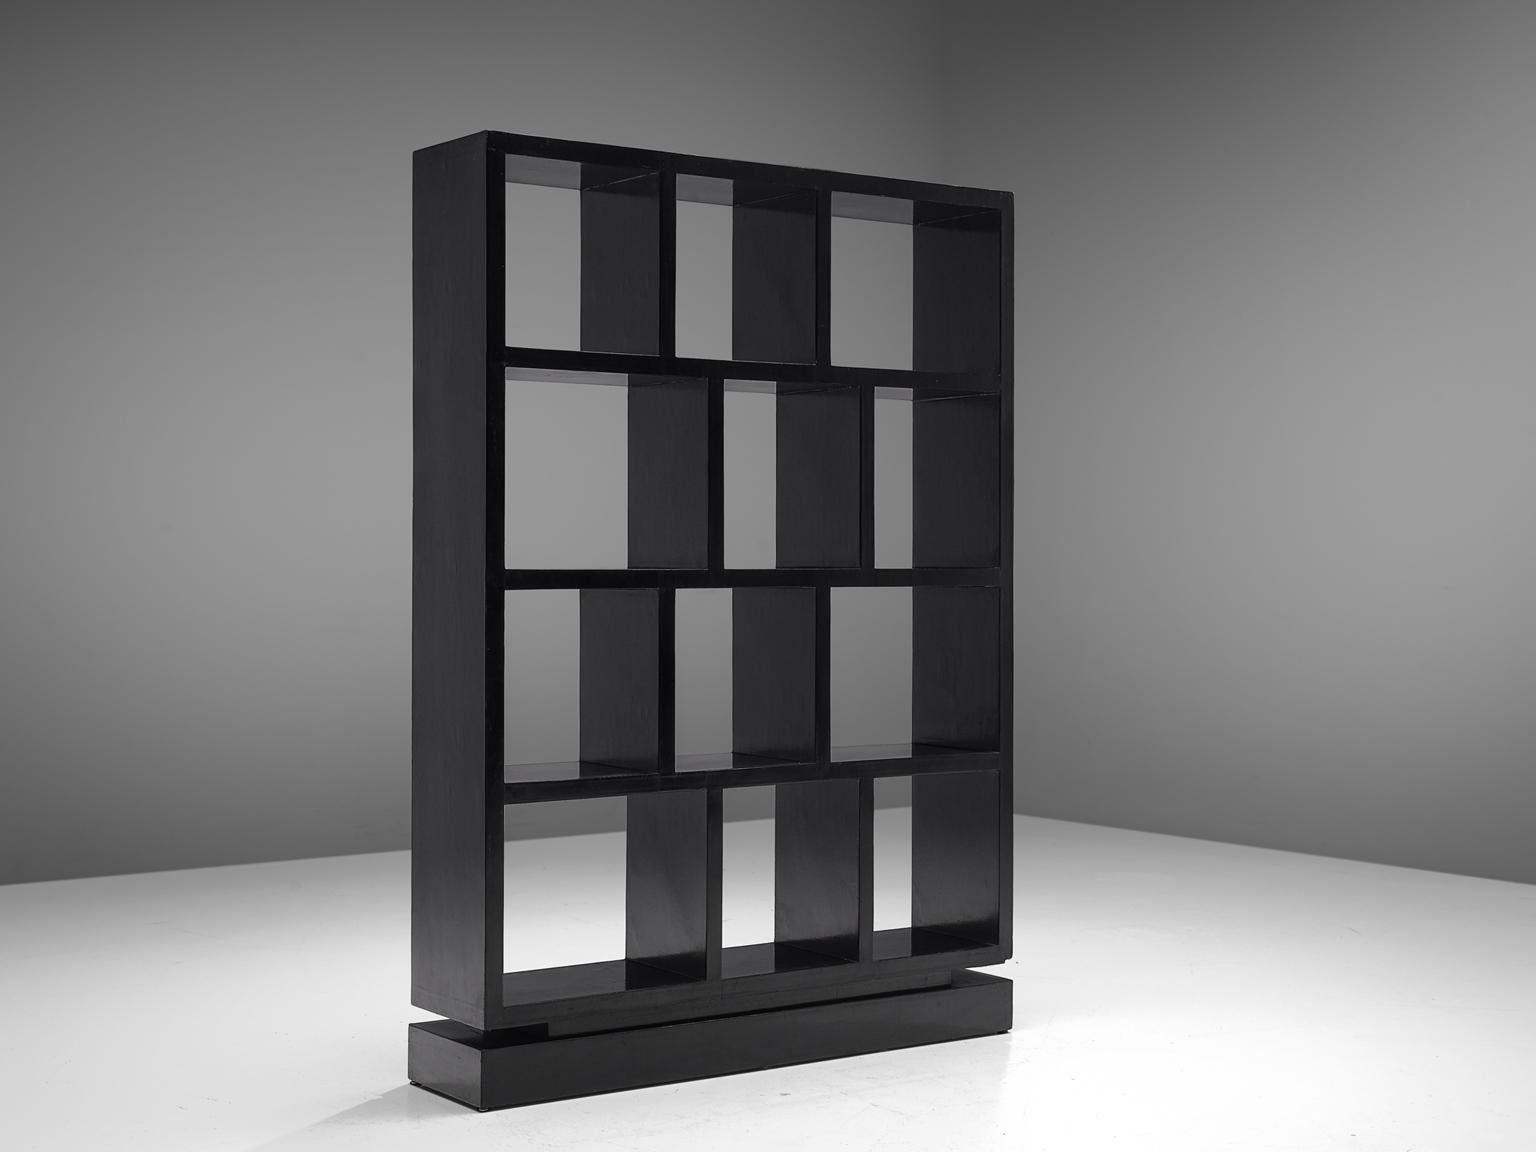 Large bookcase in the style of Osvaldo Borsani, black veneered wood and metal, Italy, 1950s.

Elegant black lacquered bookcase. With its thick, high gloss lacquered lines the pieces have a graphical expression. The storage unit rests on a large